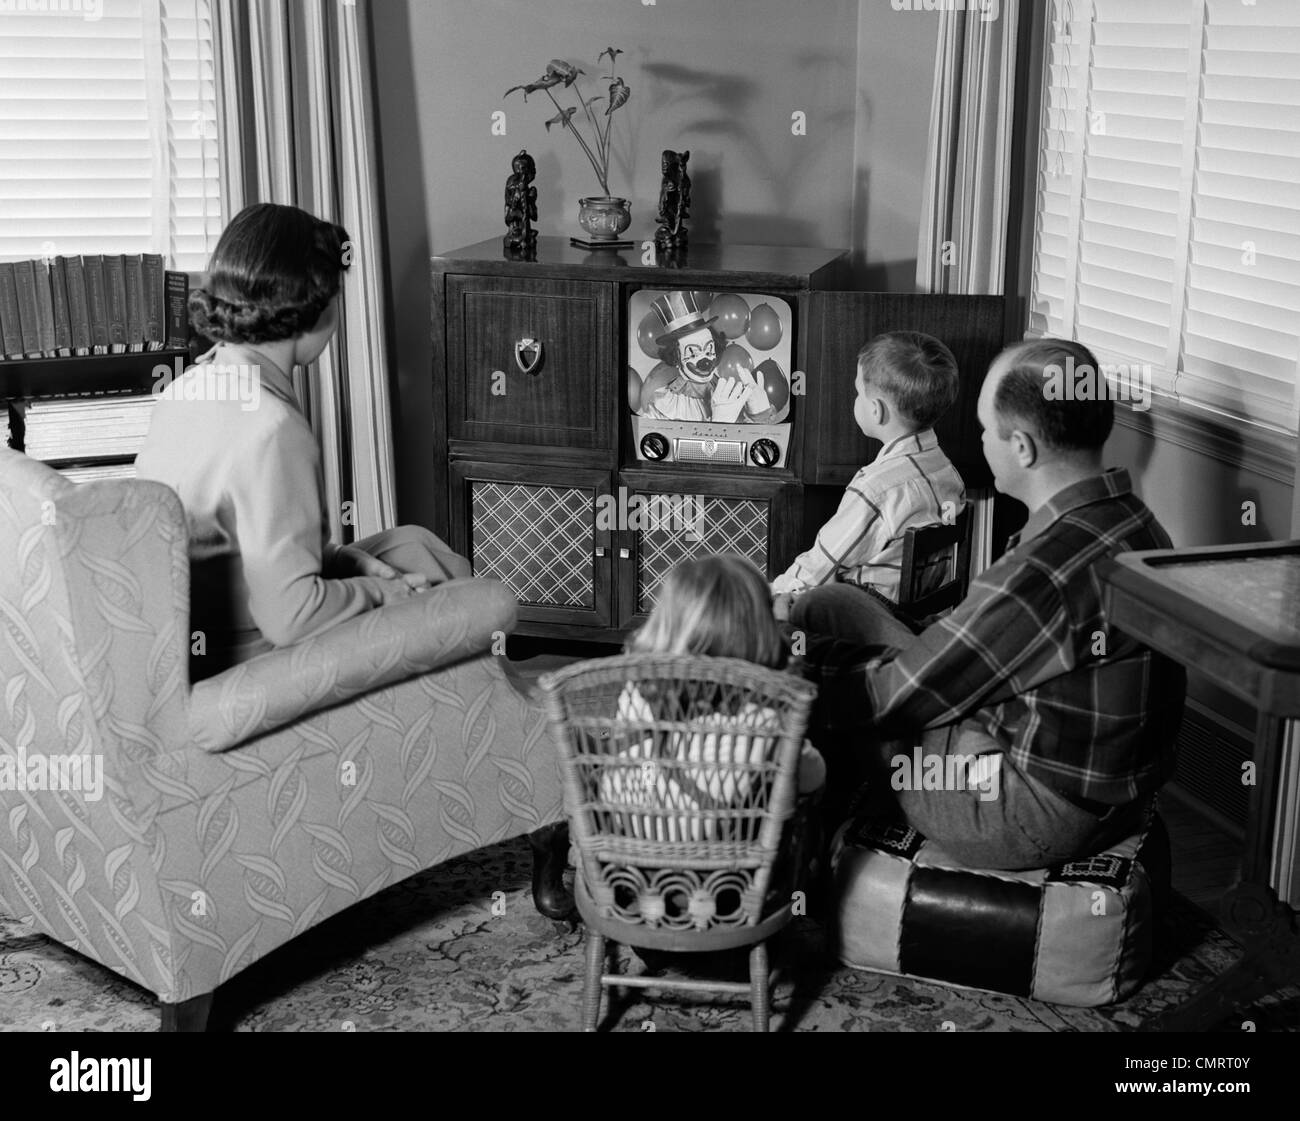 1950s BACK VIEW OF FAMILY OF 4 GATHERED AROUND TV SET WATCHING CLOWN WITH BALLOONS Stock Photo